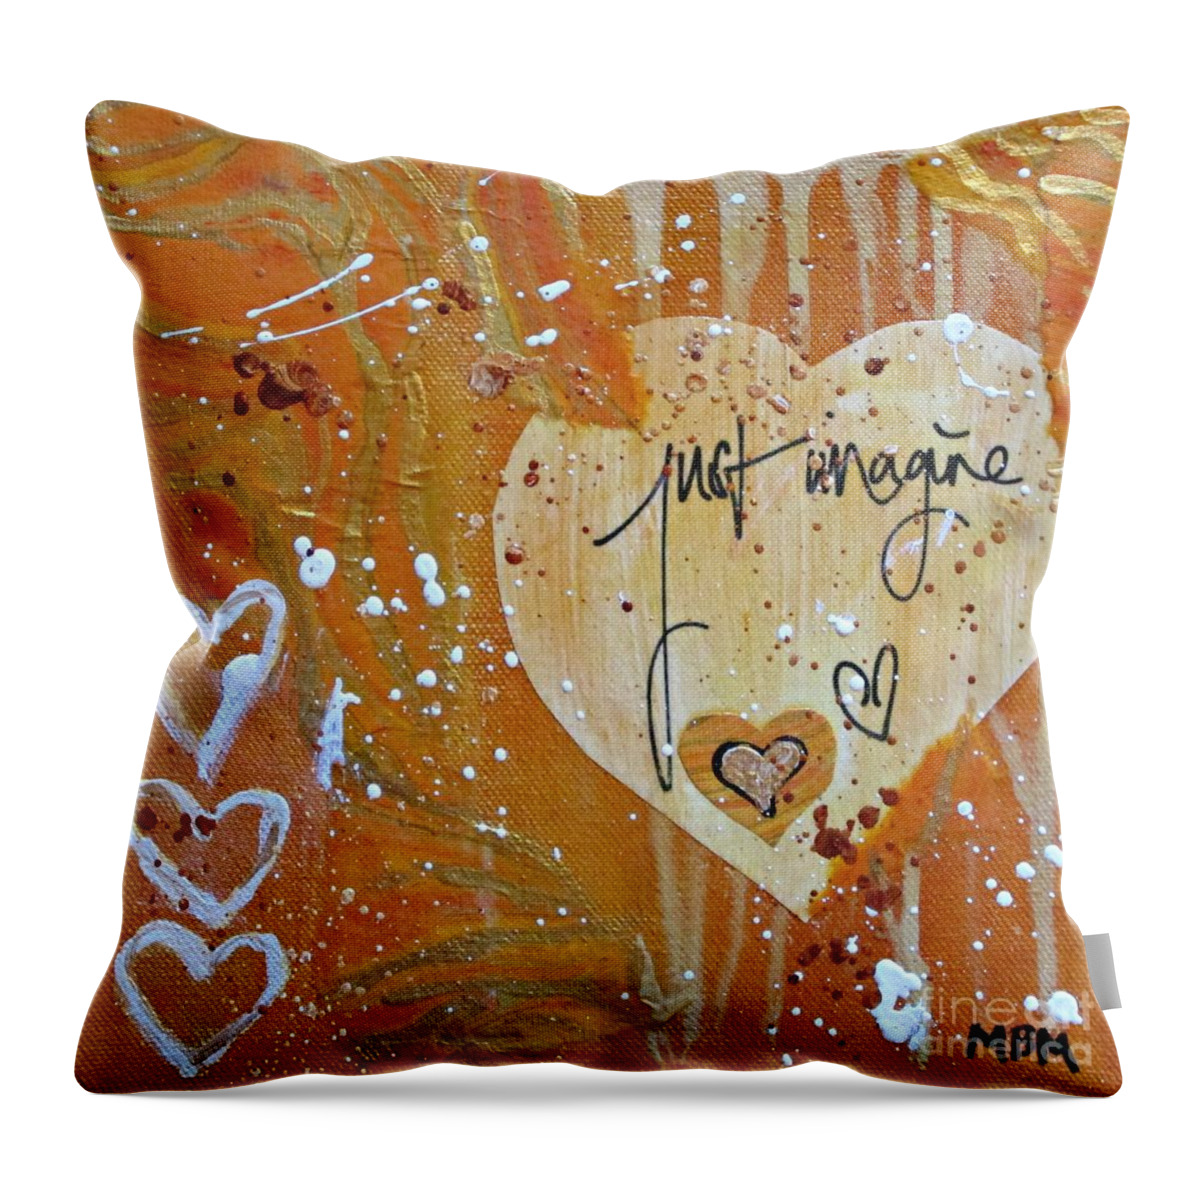 Abstract Art Throw Pillow featuring the painting Just Imagine by Mary Mirabal